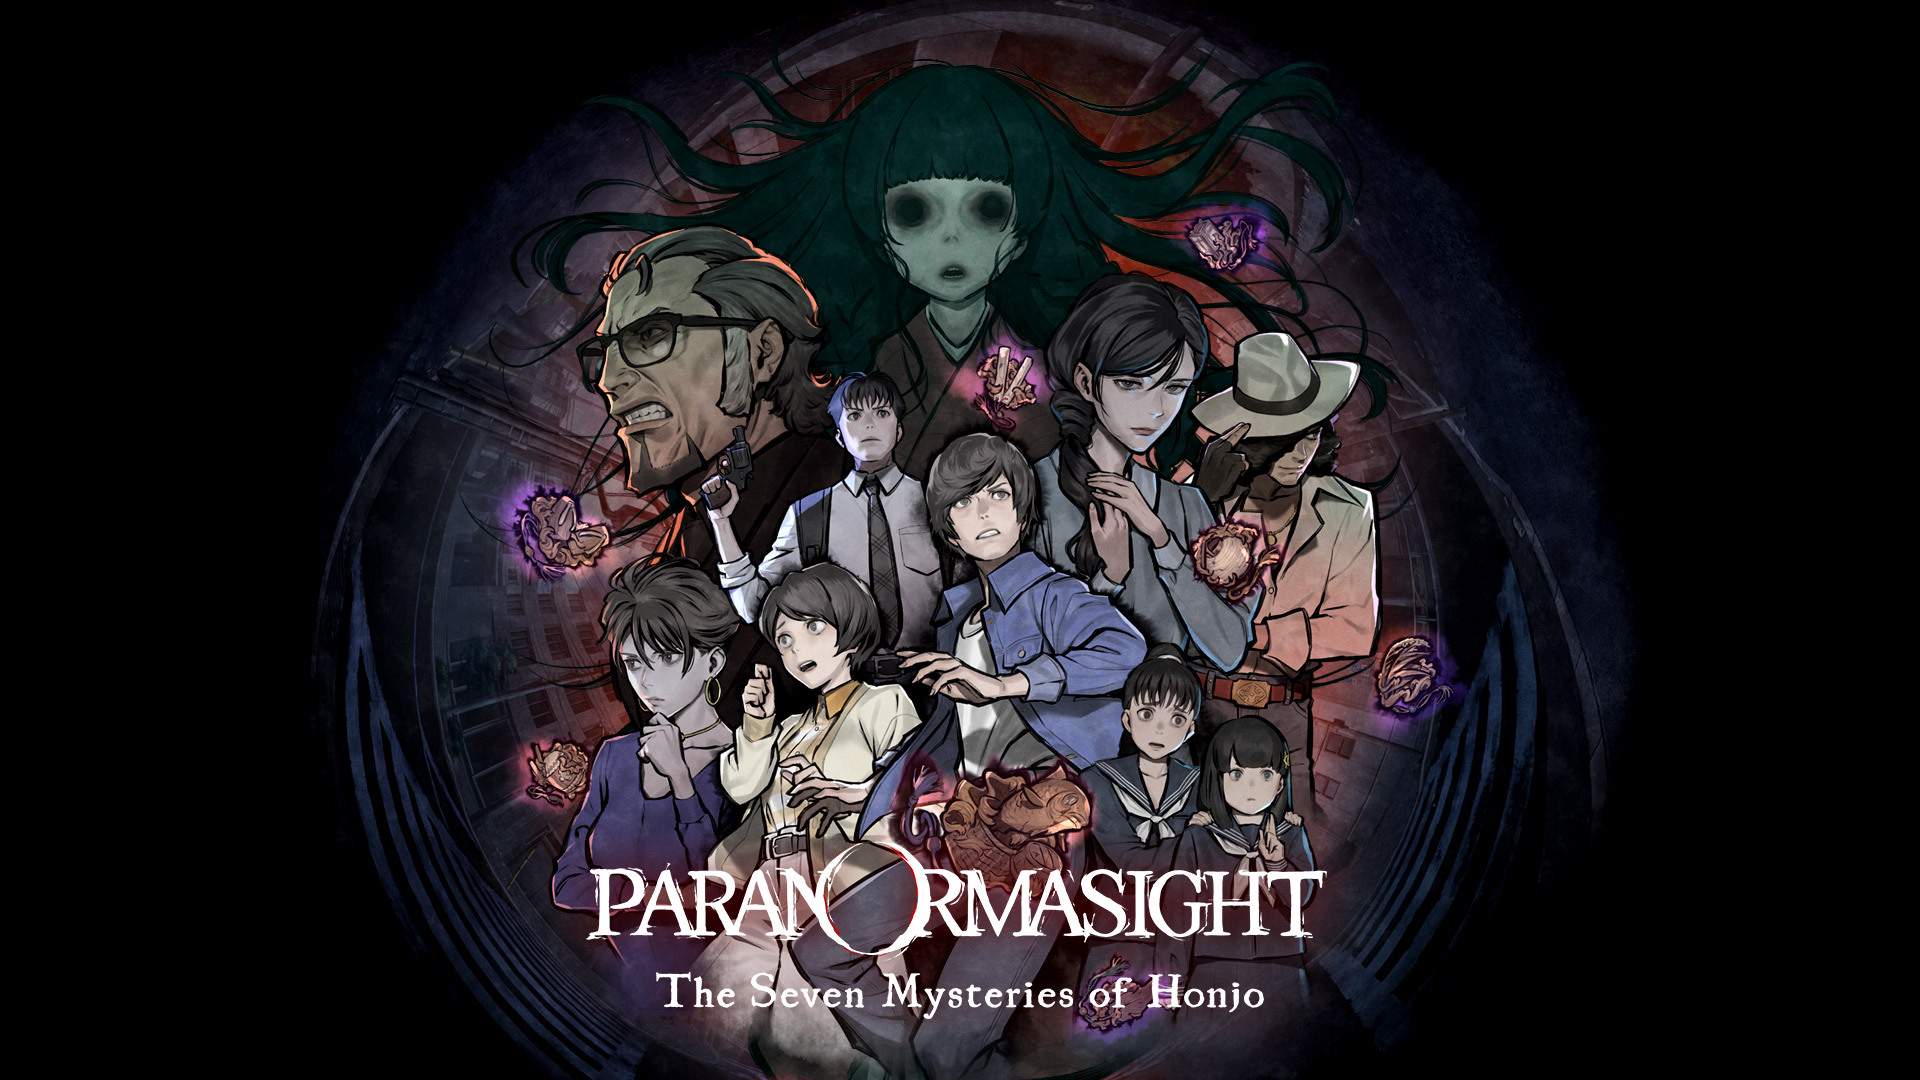 Multiple characters overlooked by a haunting, young ghost girl 'with the PARANORMASIGHT logo'.